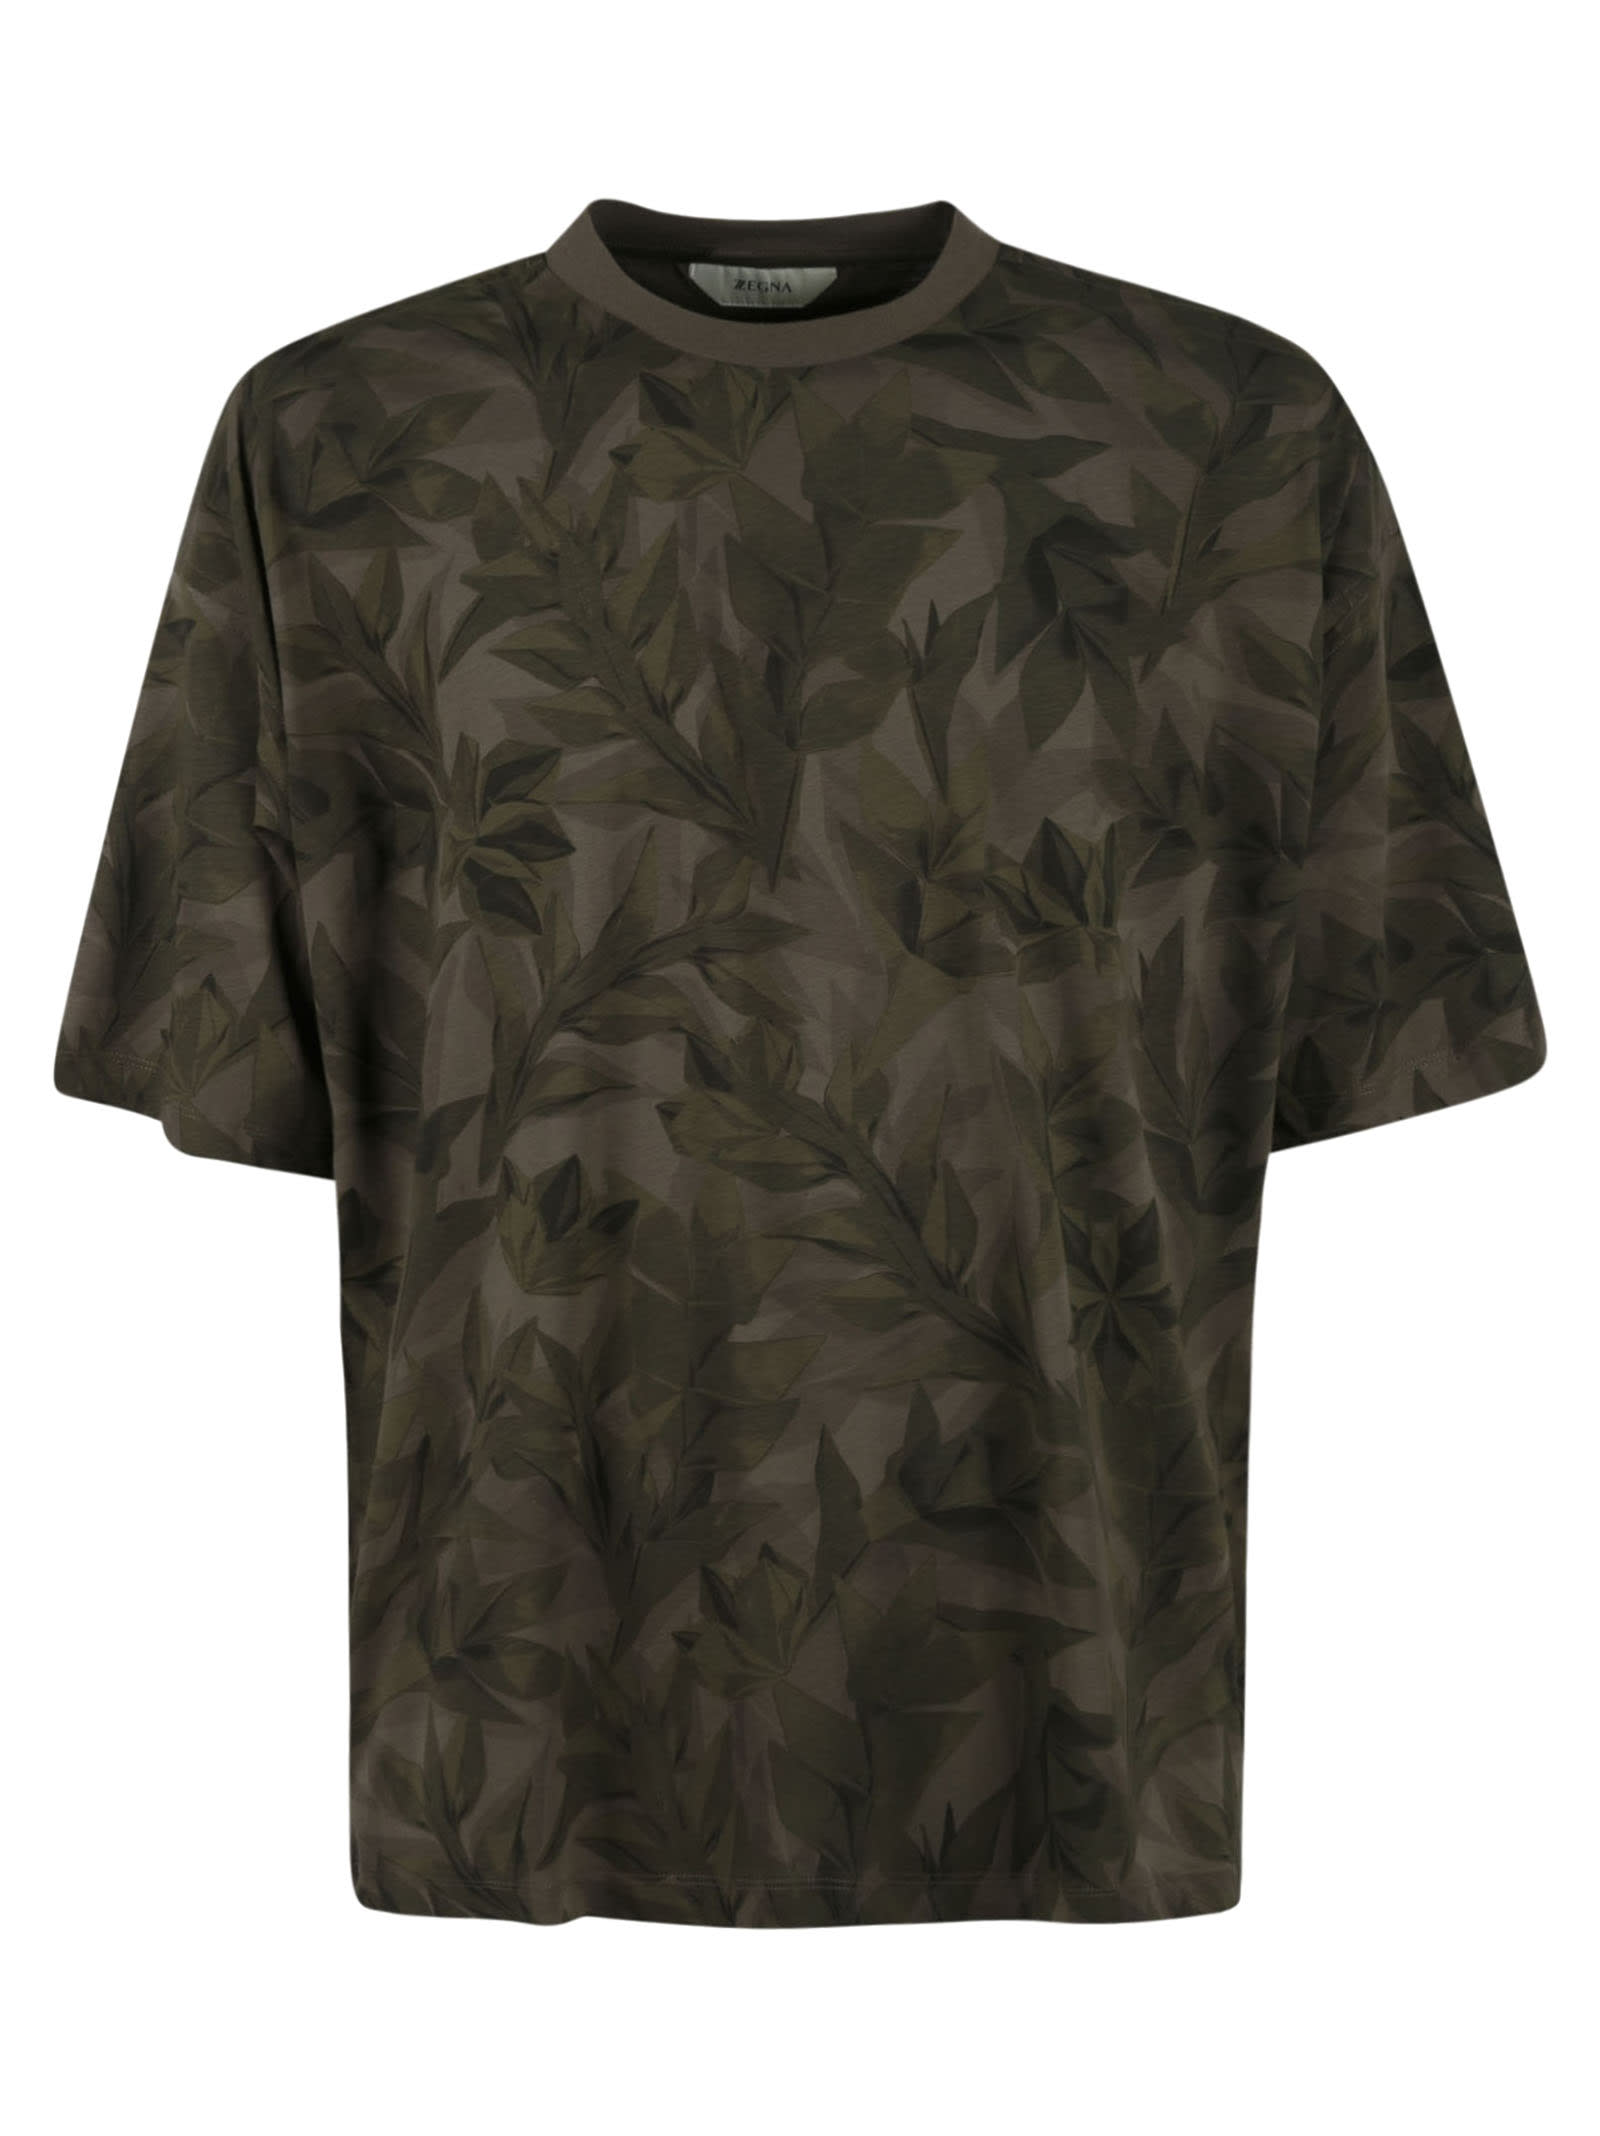 Z Zegna All-over Printed T-shirt